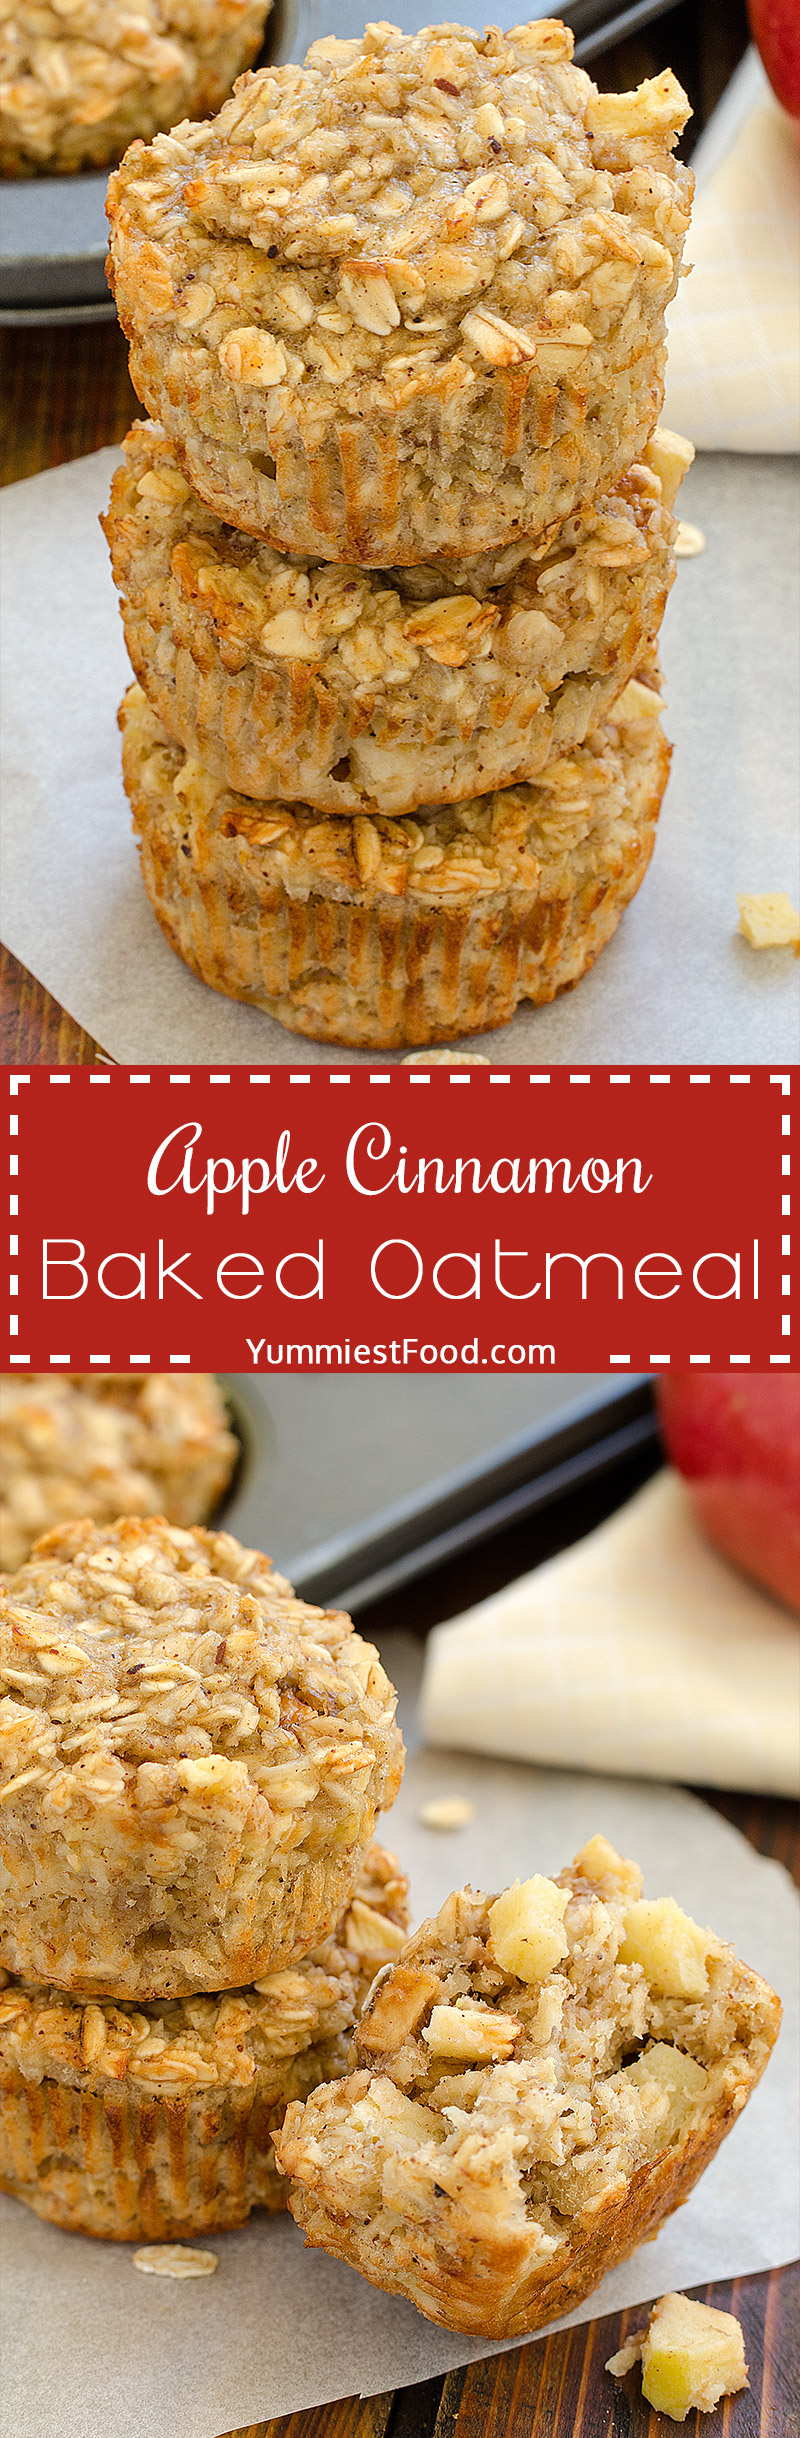 Apple Cinnamon Baked Oatmeal - moist, delicious, healthy, gluten free breakfast, perfect way to start your day